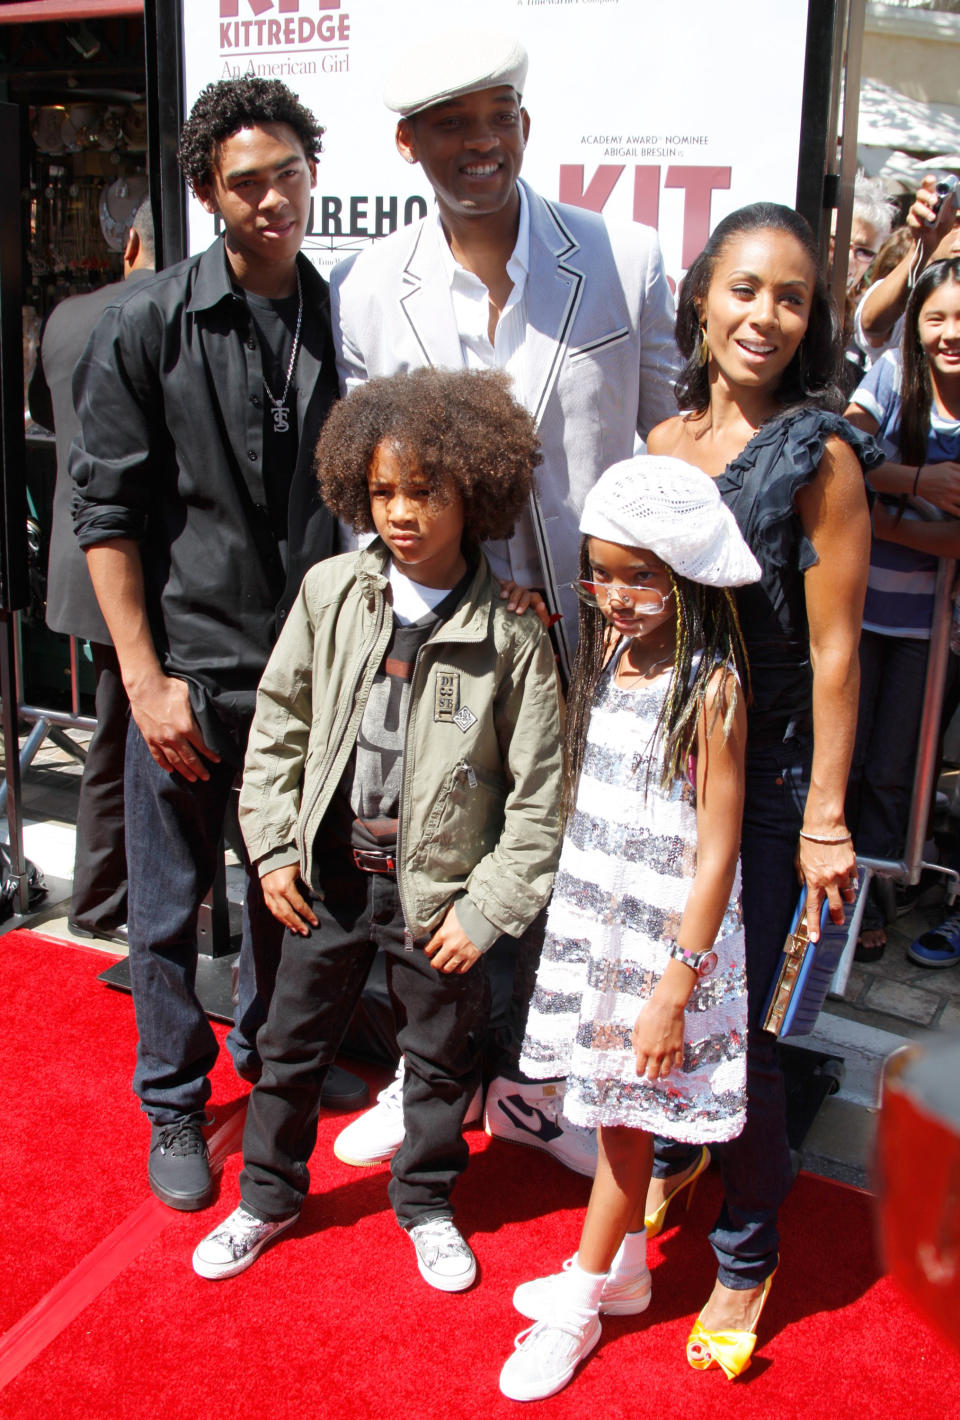 LOS ANGELES - JUNE 14:  Actor Will Smith, actress Jada Pinkett Smith, with children (L-R) Trey Smith, Jaden Smith, Willow Smith arrive at the Premiere Of 'Kit Kittredge: An American Girl' held at the Grove on June 14, 2008 in Los Angeles, California.  (Photo by Frazer Harrison/Getty Images)